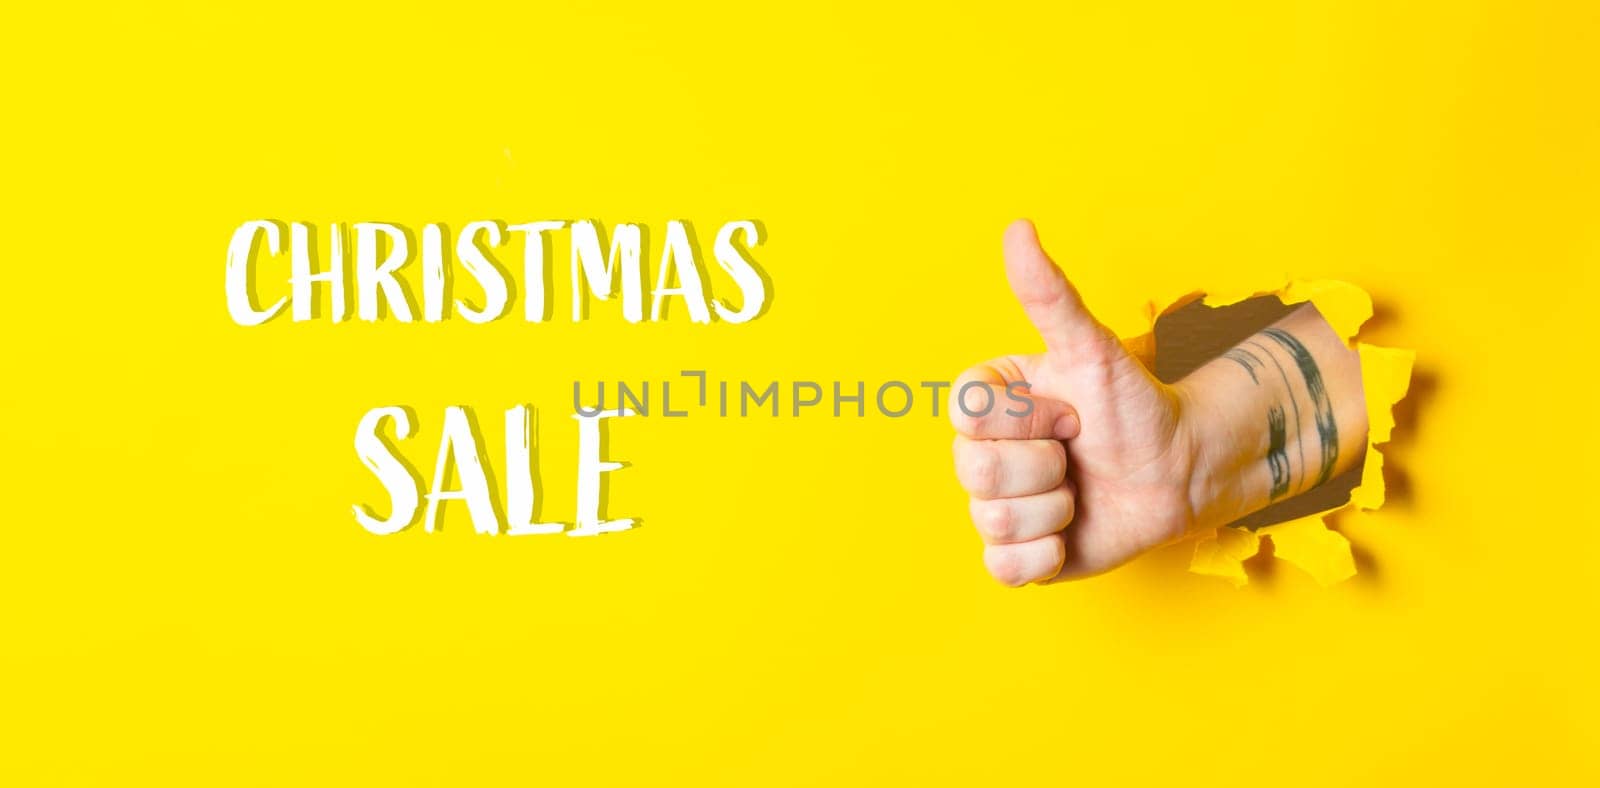 A hand giving a thumbs up with the words Christmas Sale written below it. The image has a positive and festive mood, as it is a thumbs up gesture